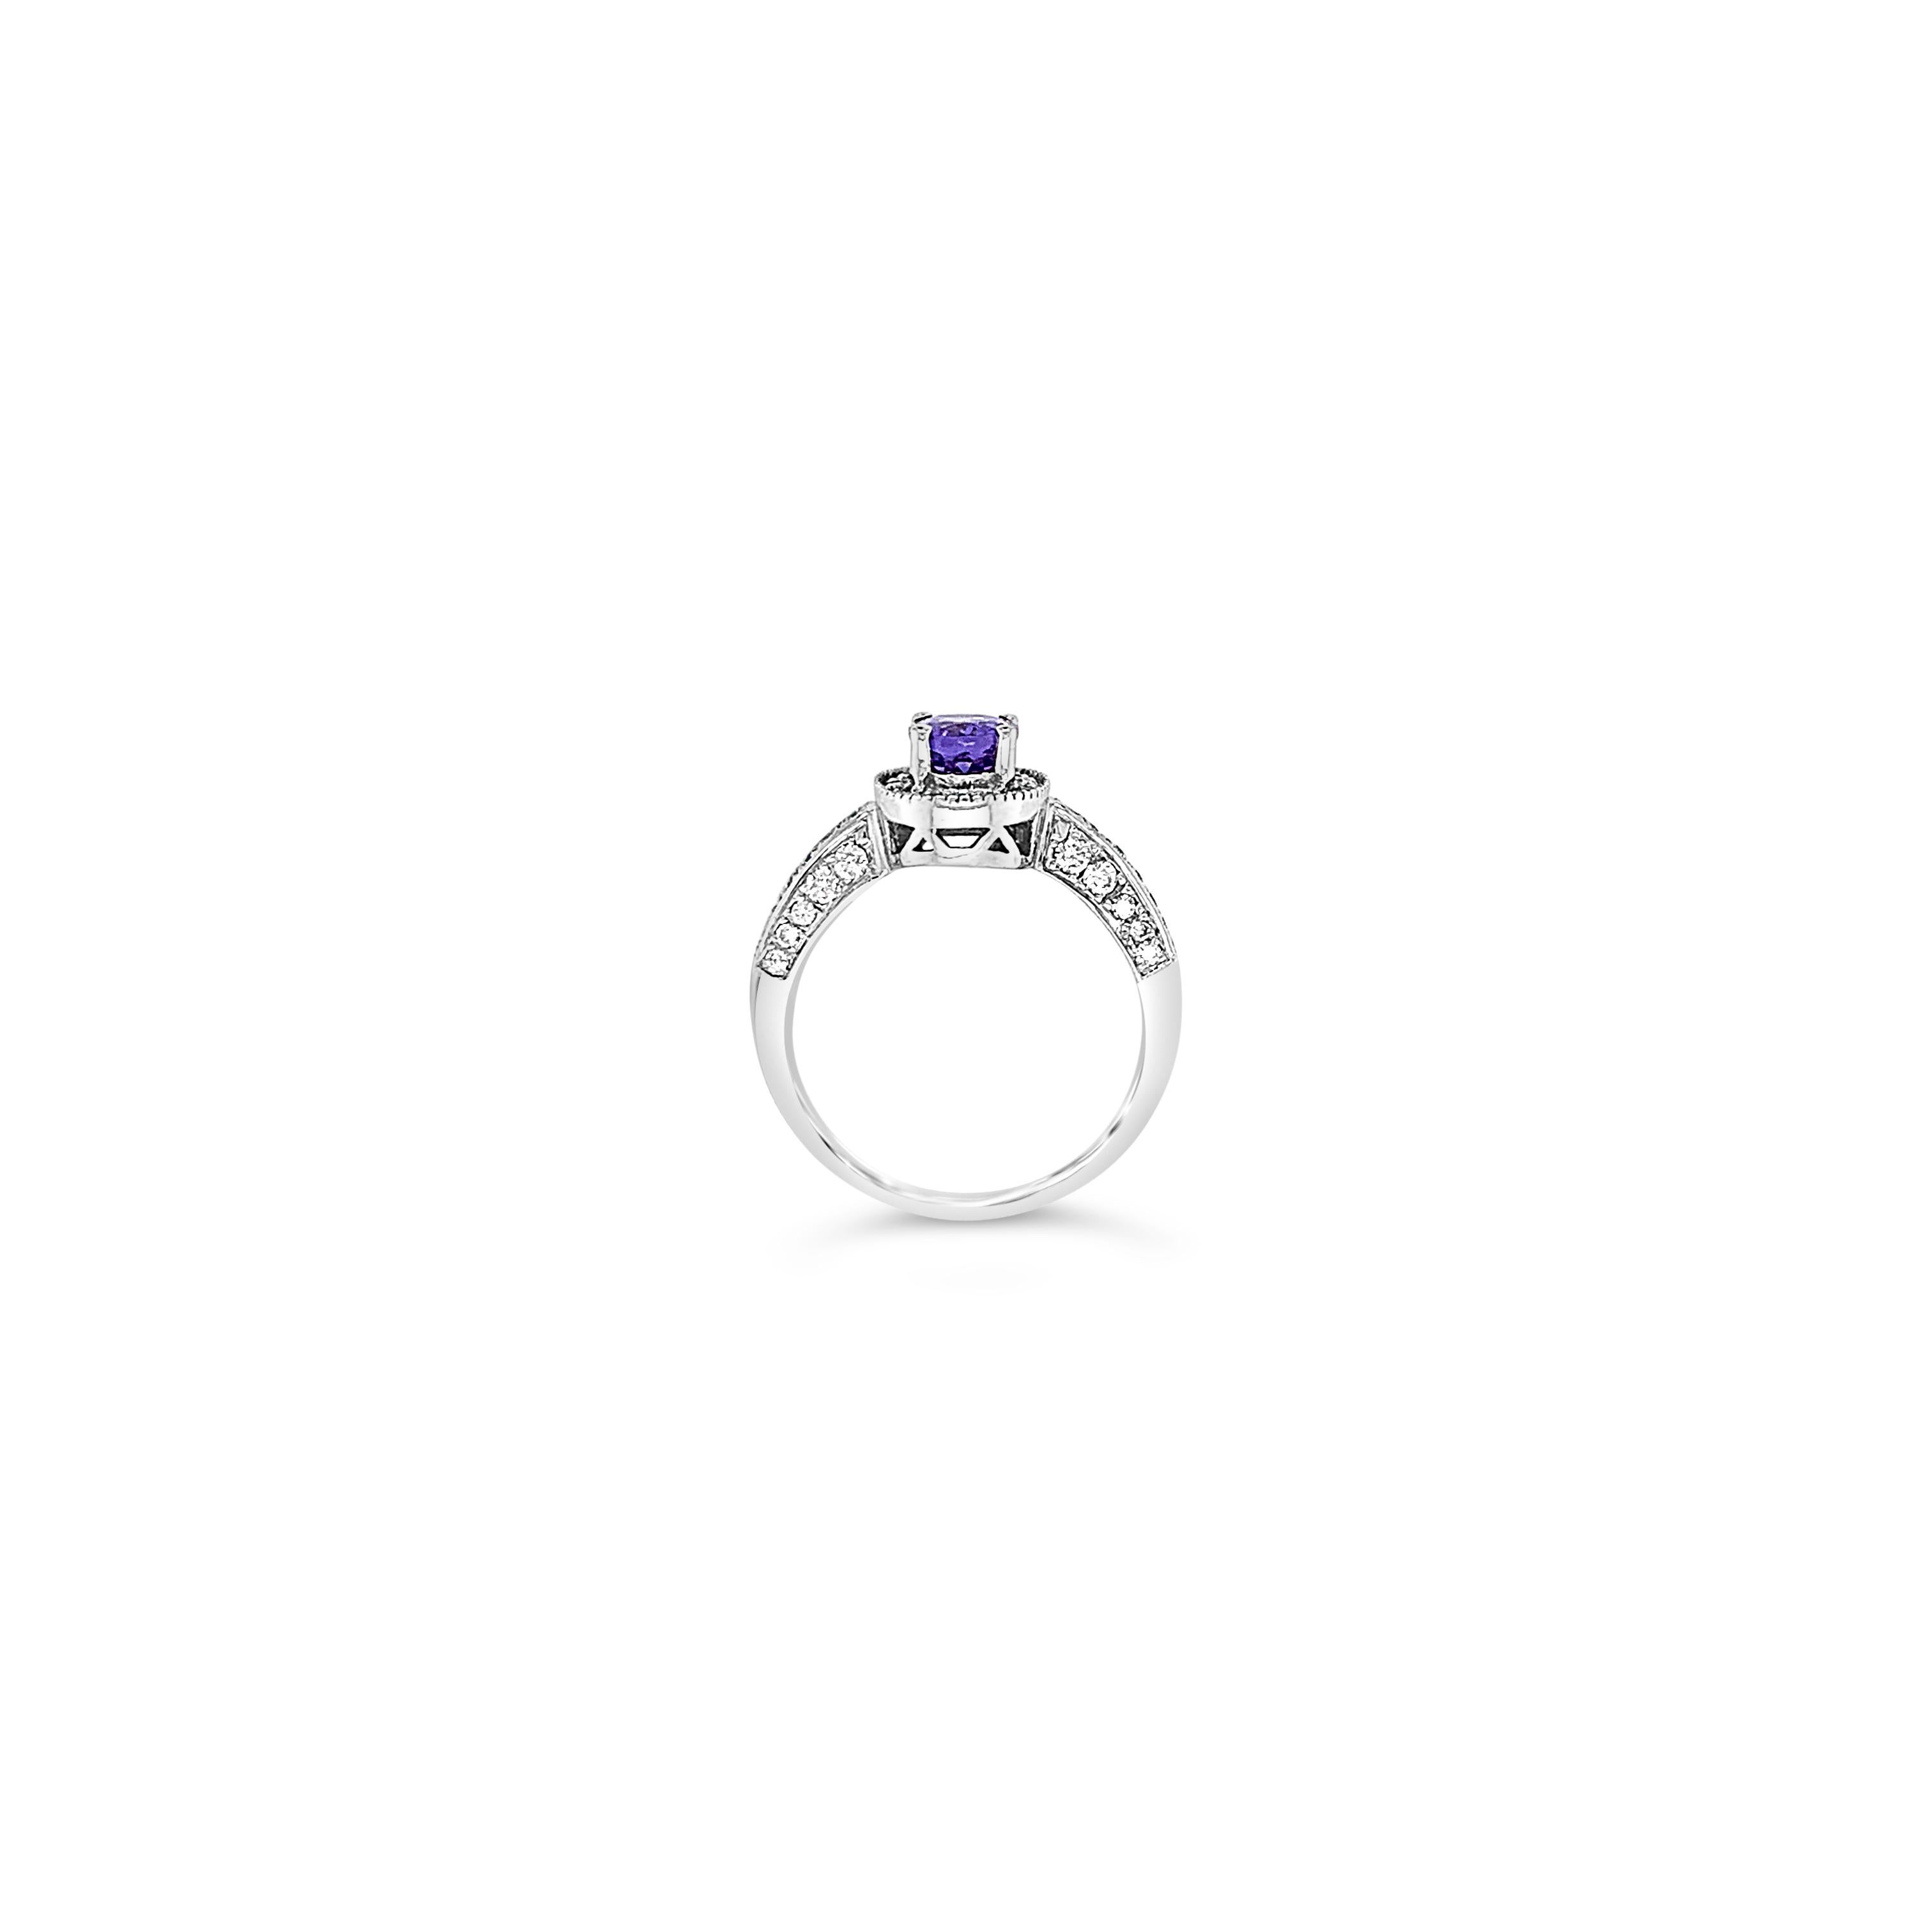 Le Vian® Ring featuring 1 cts. Blueberry Tanzanite®, 3/8 cts. Vanilla Diamonds® set in 14K Vanilla Gold®. Please feel free to reach out with any questions! Item comes with a Le Vian® jewelry box as well as a Le Vian® suede pouch! 